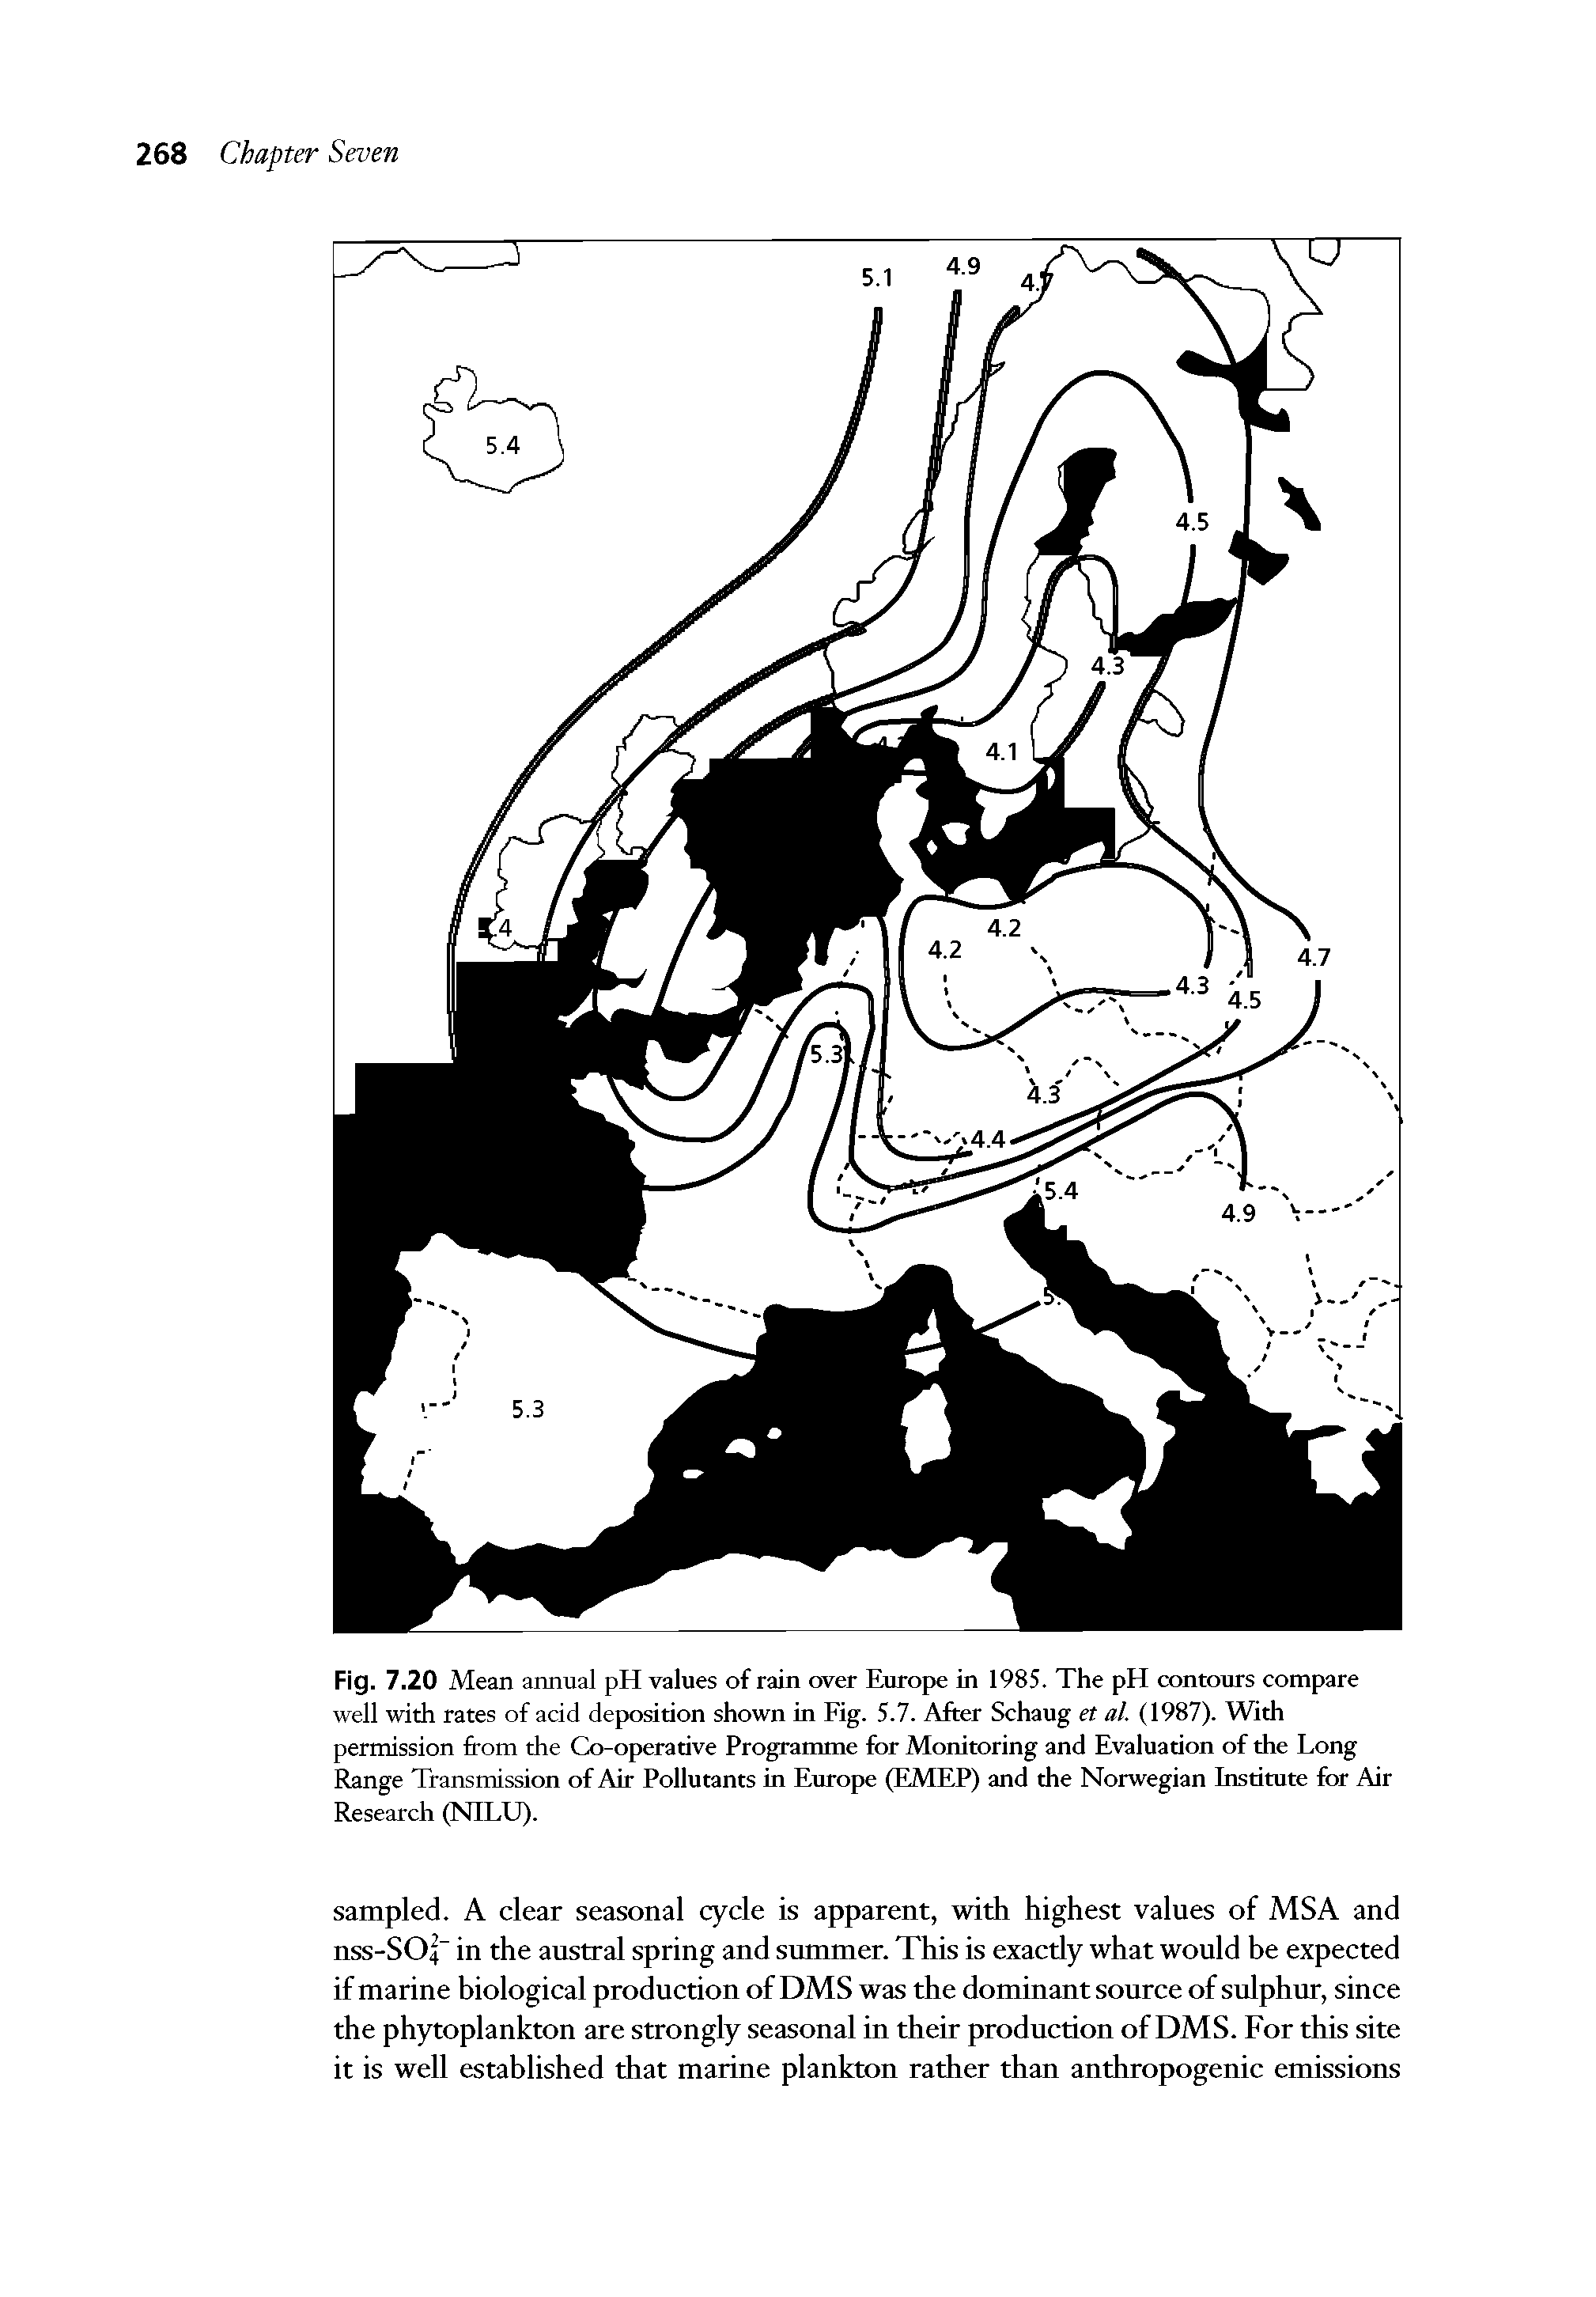 Fig. 7.20 Mean annual pH values of rain over Europe in 1985. The pH contours compare well with rates of acid deposition shown in Fig. 5.7. After Schaug et al. (1987). With permission from the Co-operative Programme for Monitoring and Evaluation of the Long Range Transmission of Air Pollutants in Europe (EMEP) and the Norwegian Institute for Air Research (NILU).